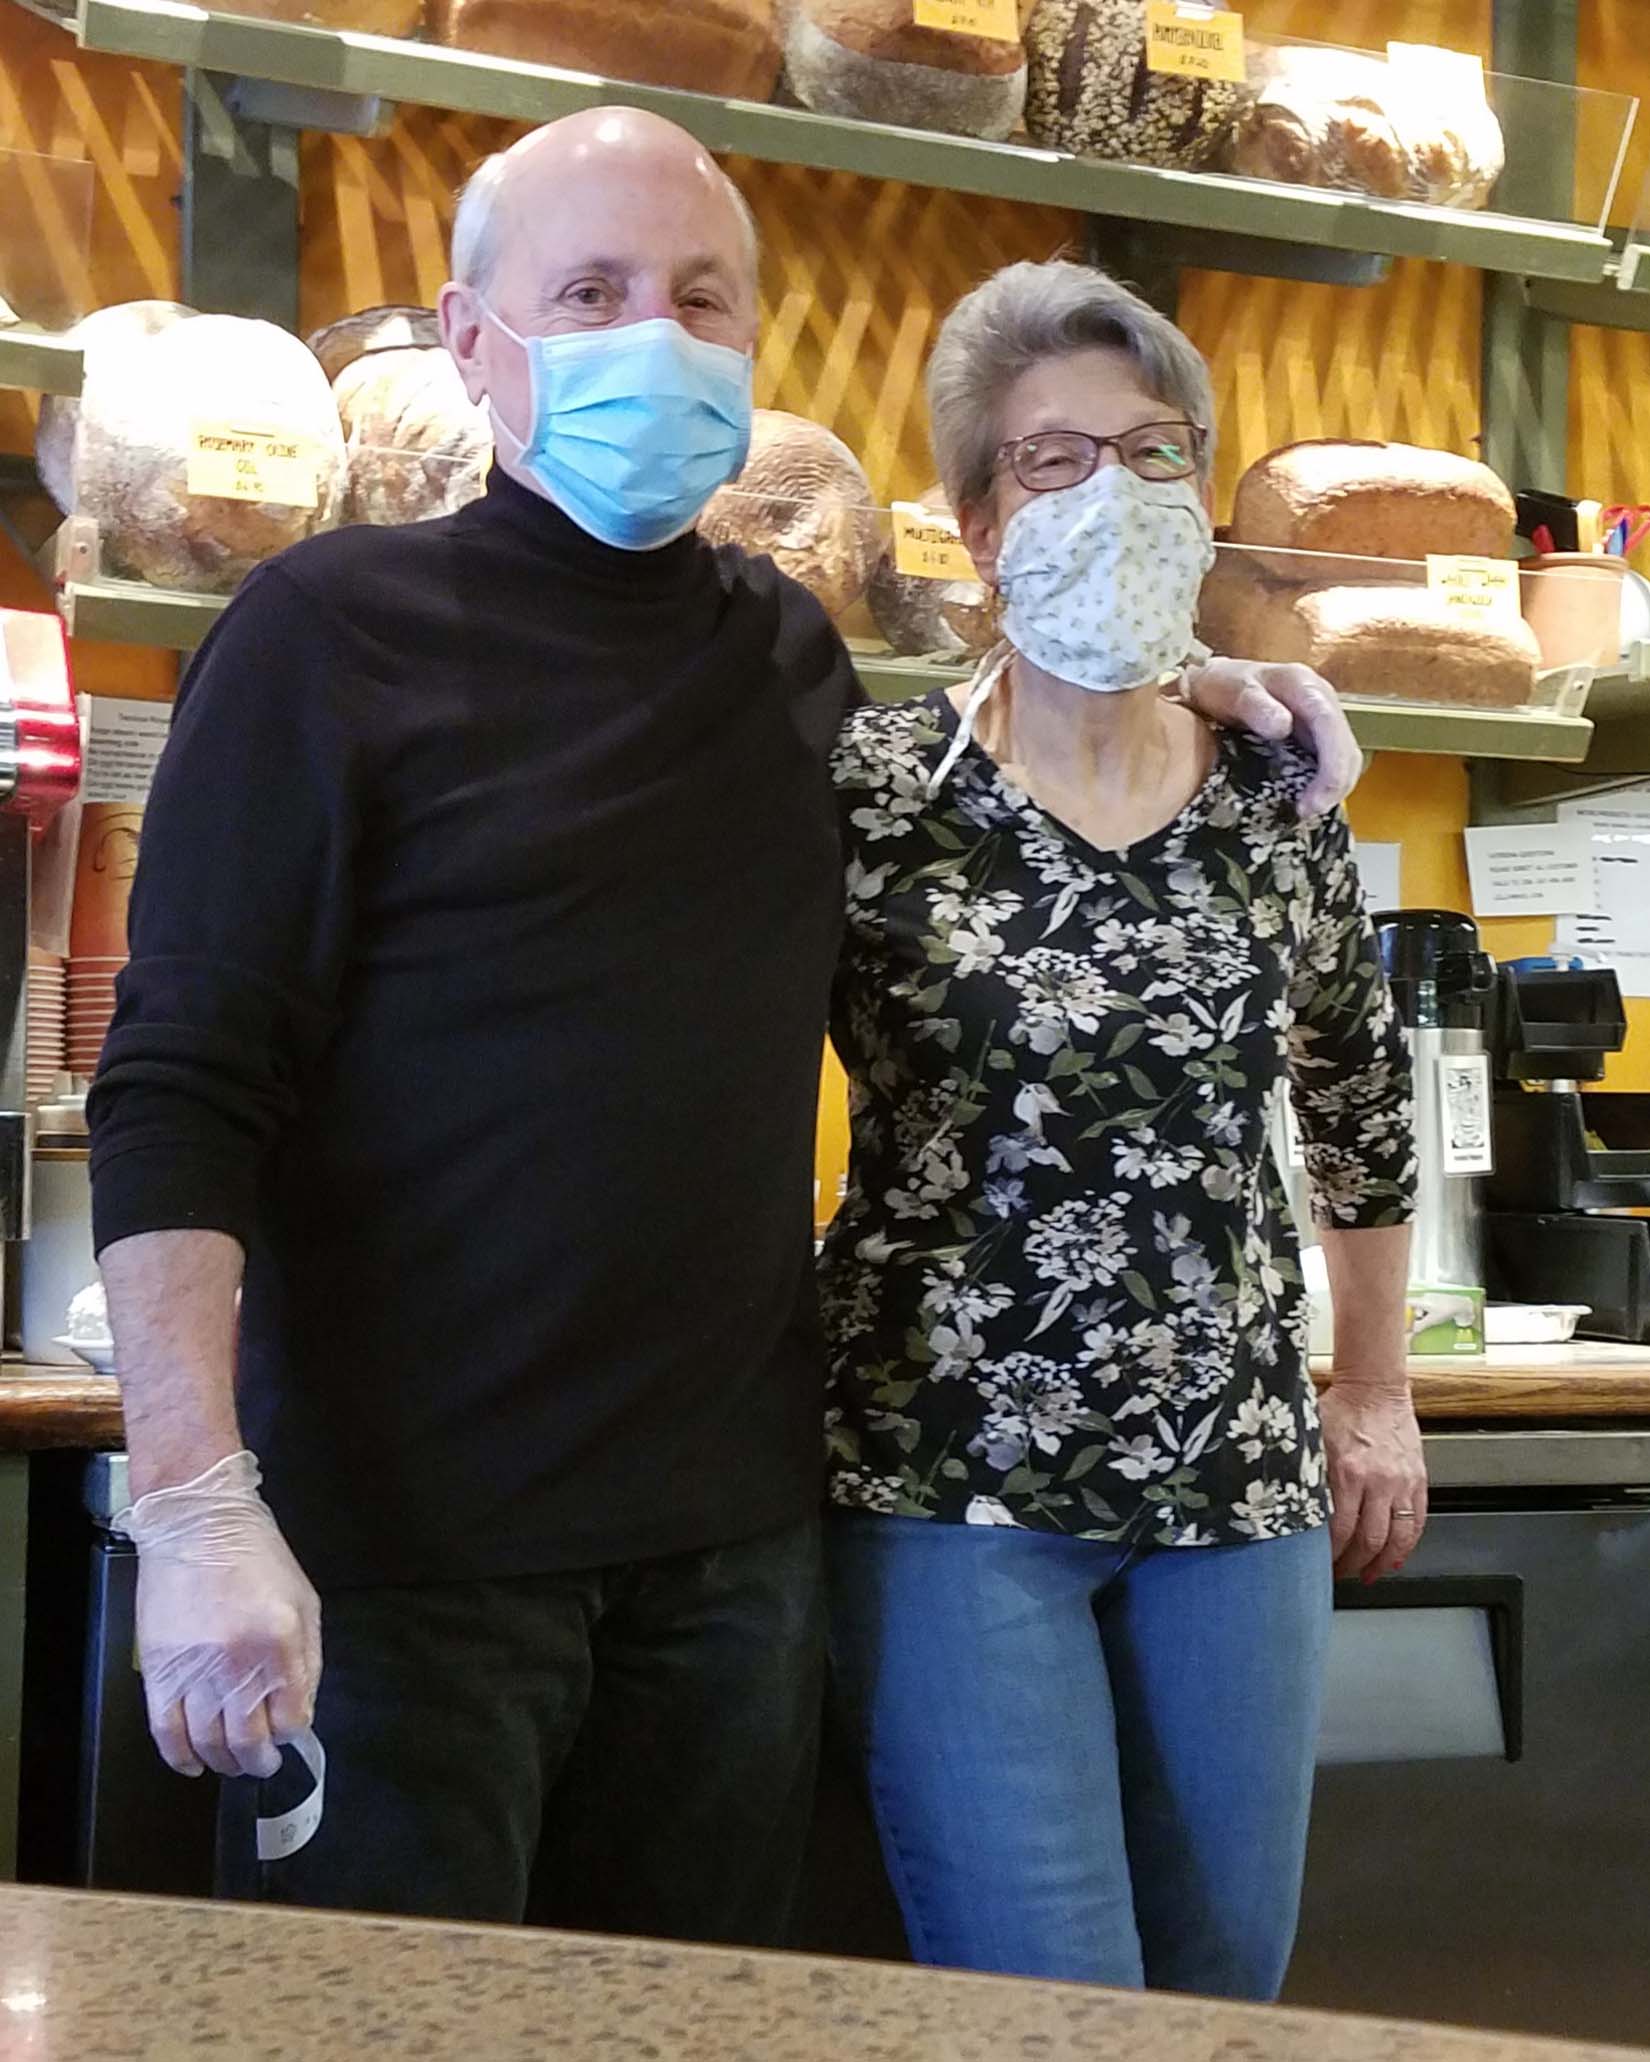 jim lilly and wife in bakery with masks